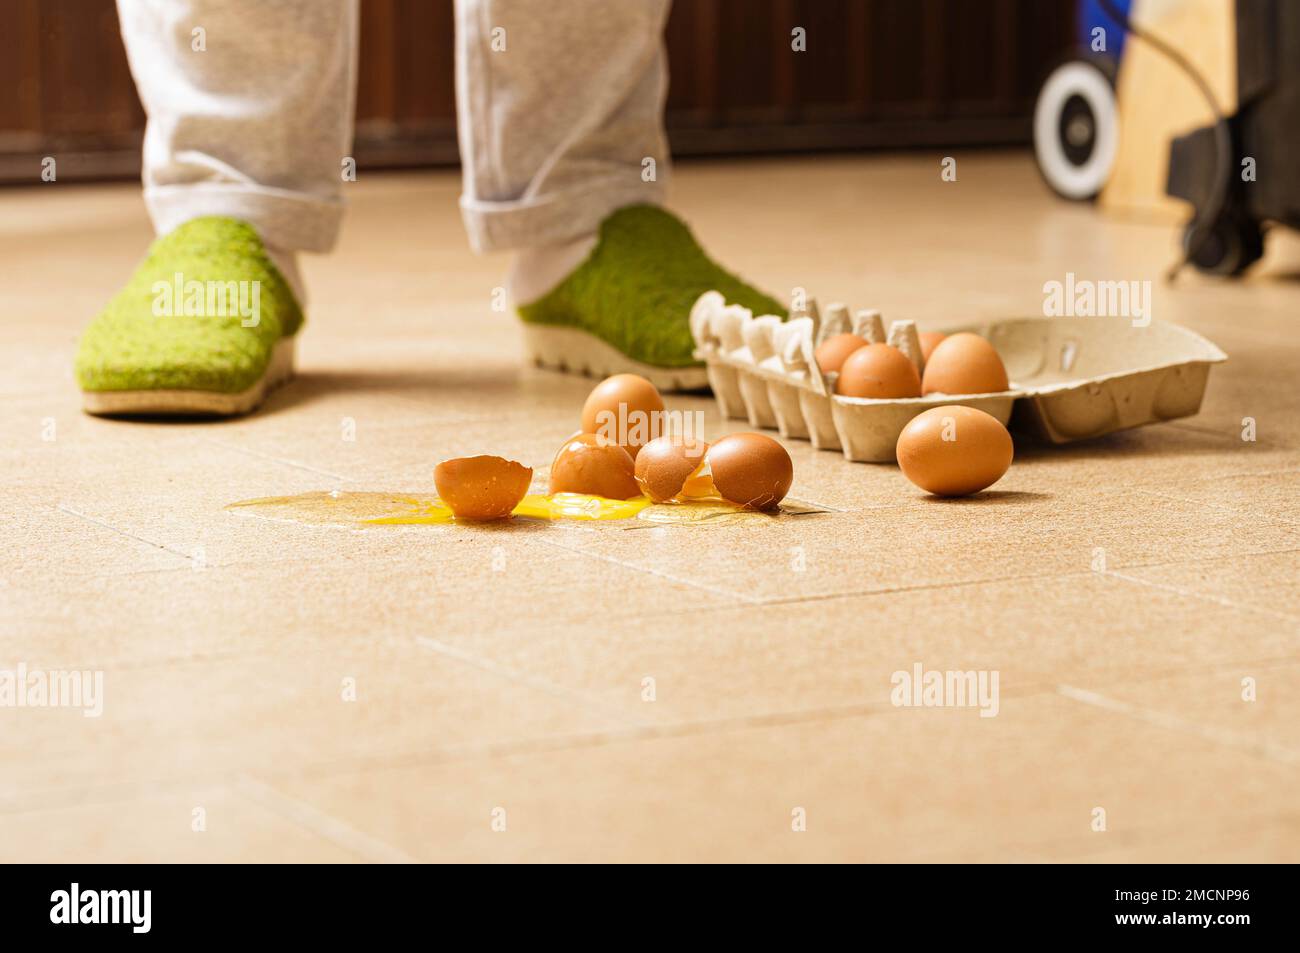 An unforeseen culinary mishap captured in a moment: eggs accidentally broken are scattered on the kitchen floor. The scene offers a glimpse into a mom Stock Photo